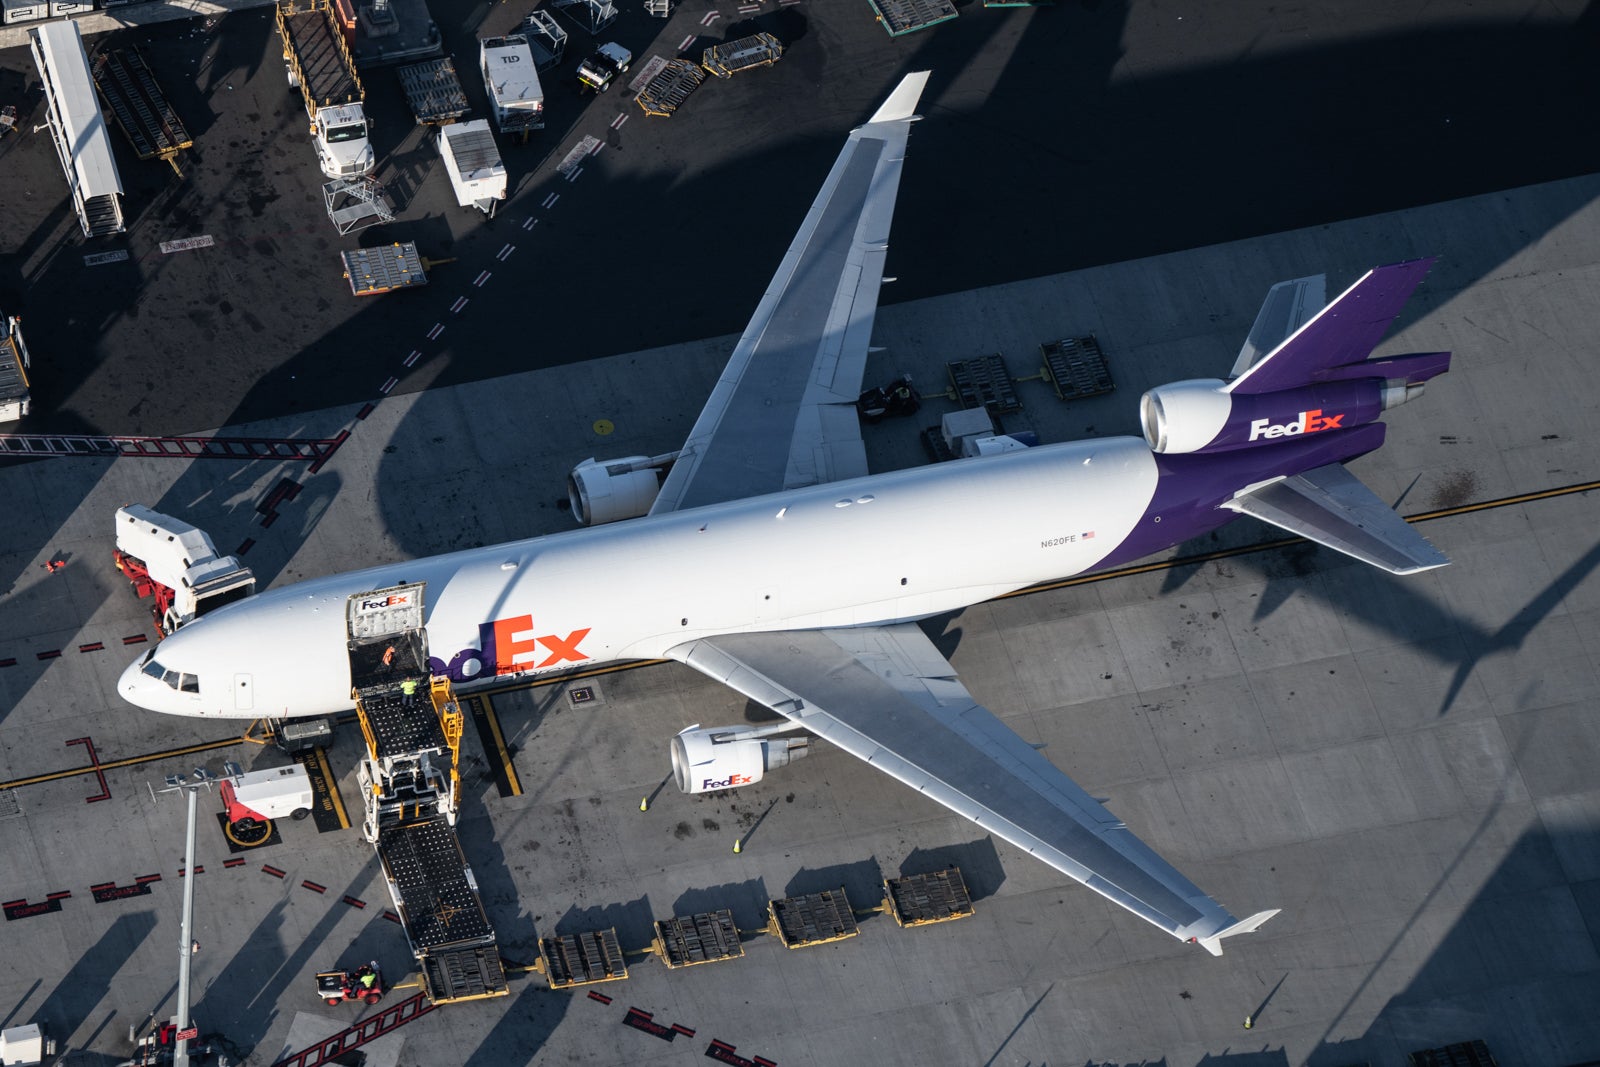 Fedex-MD-11-at-cargo-stand-at-Sydney-Airport-SY